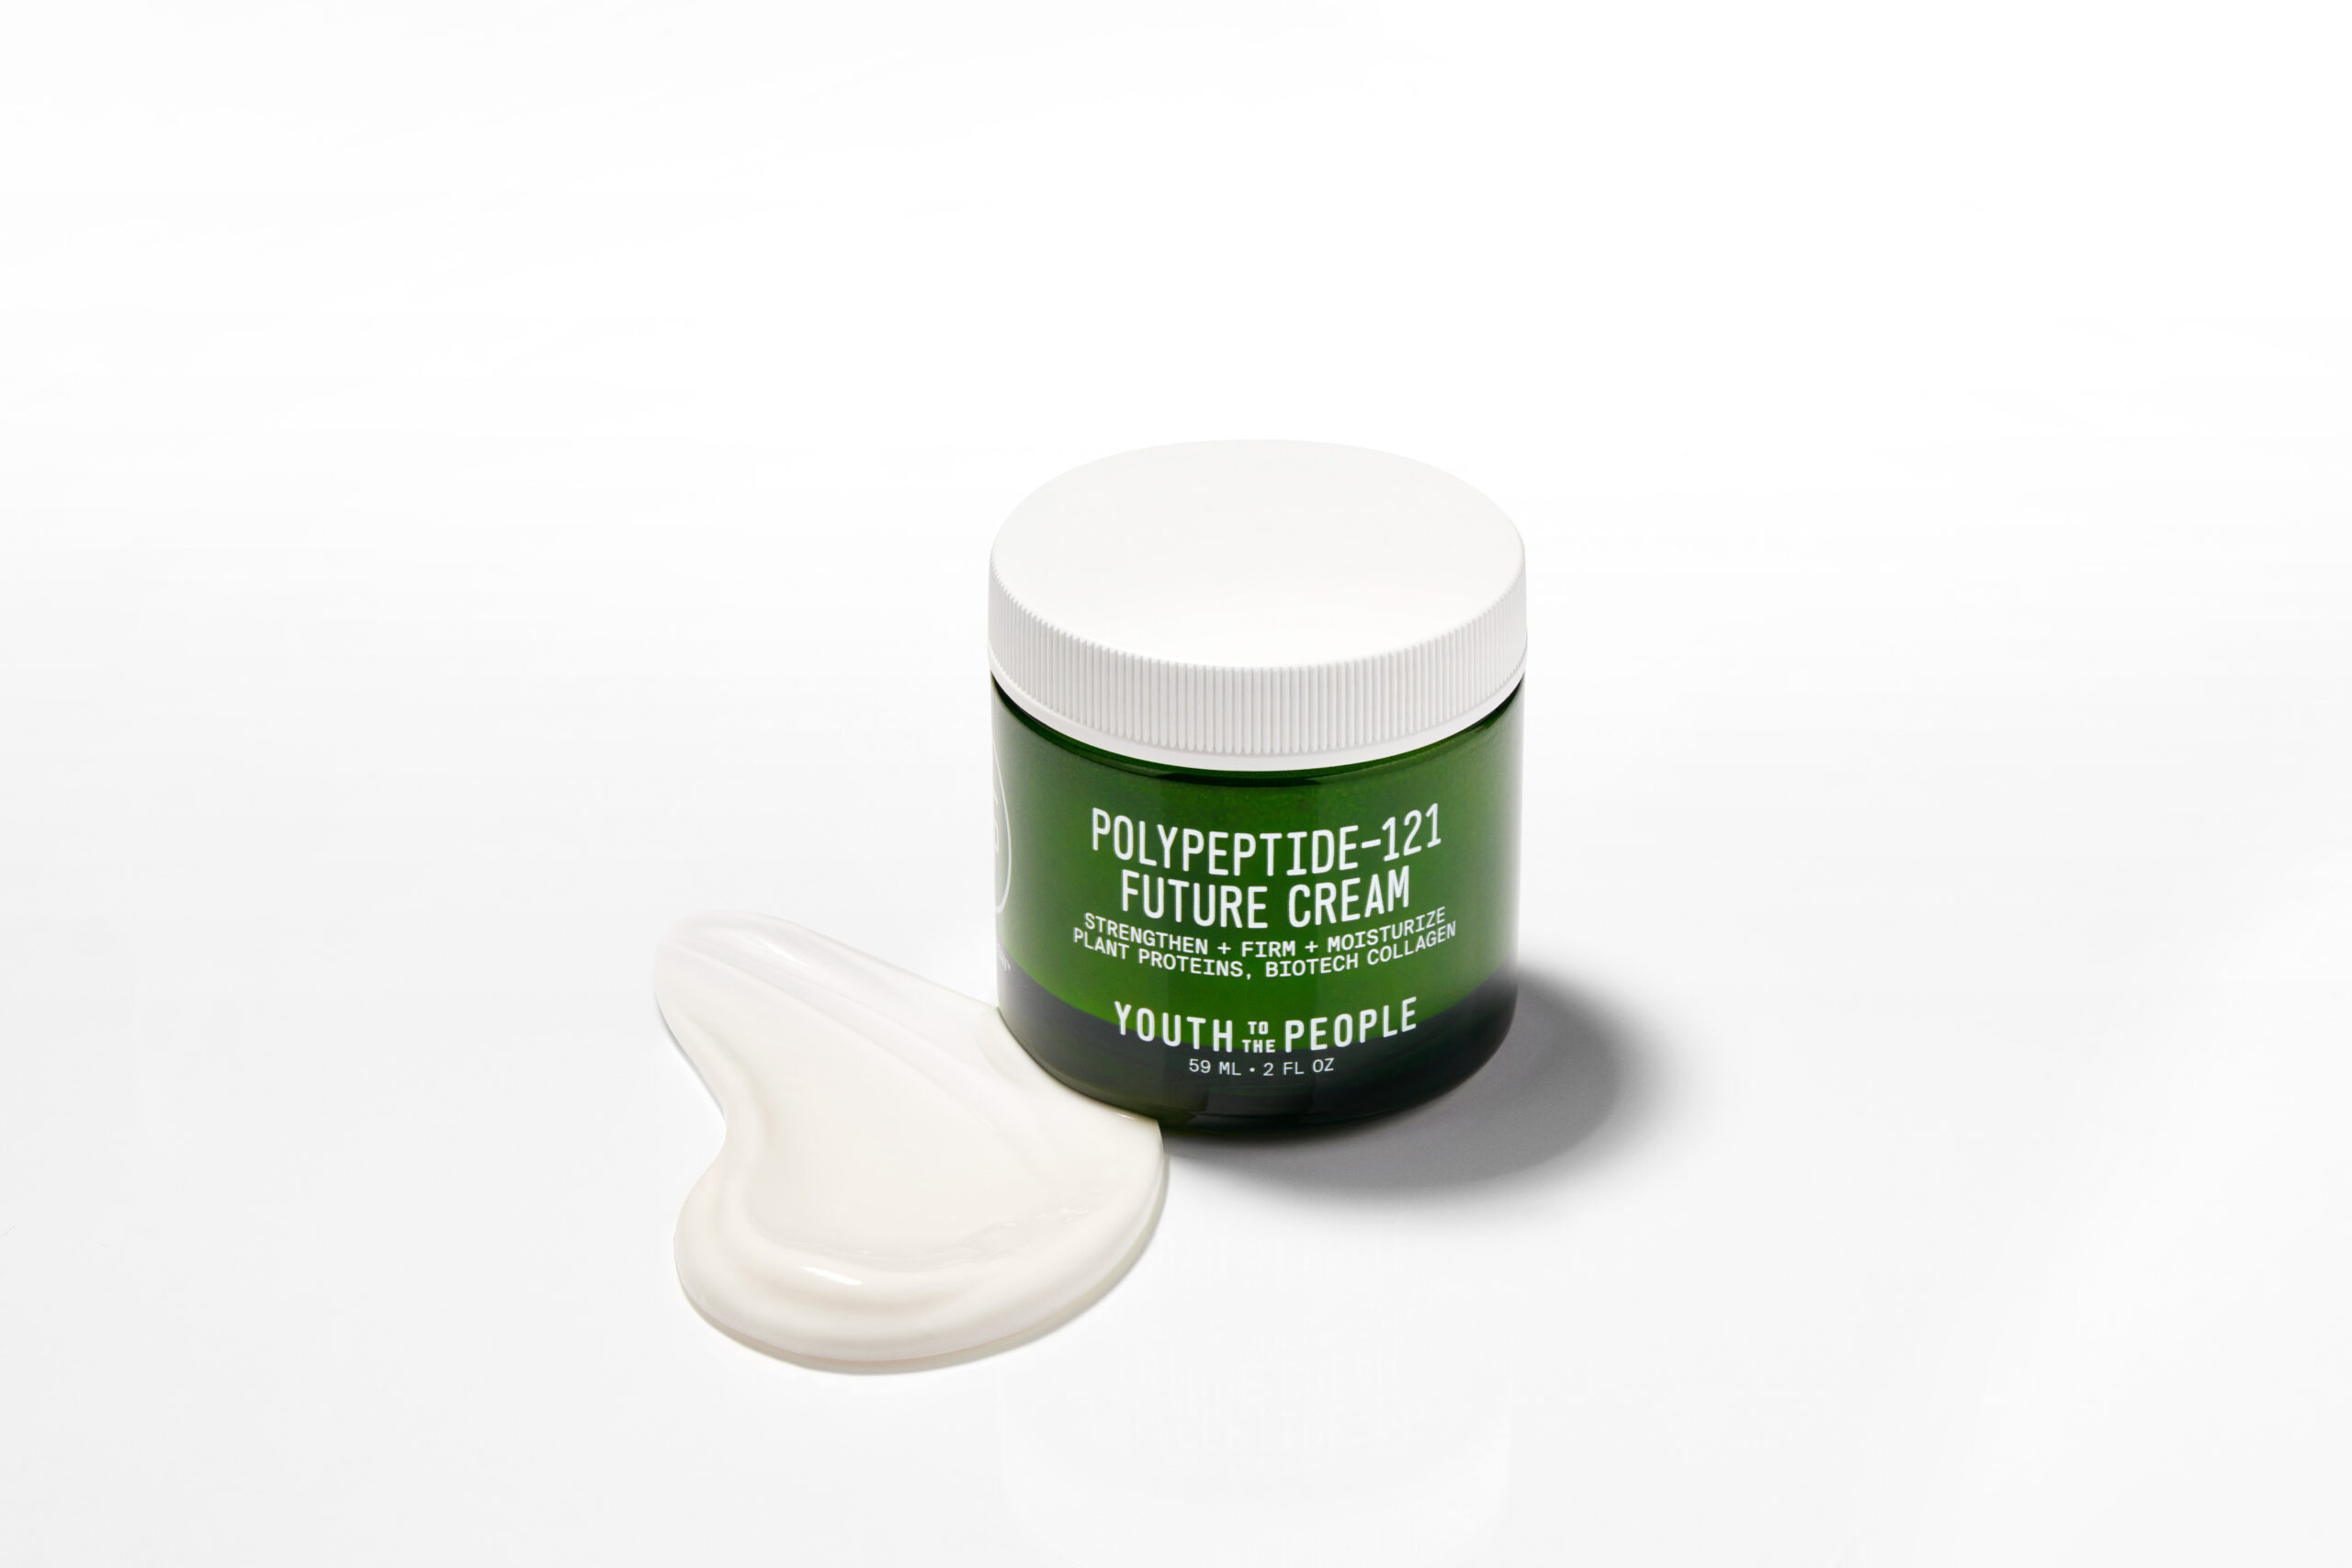 Youth To The People's NEW Polypeptide-121 Future Cream